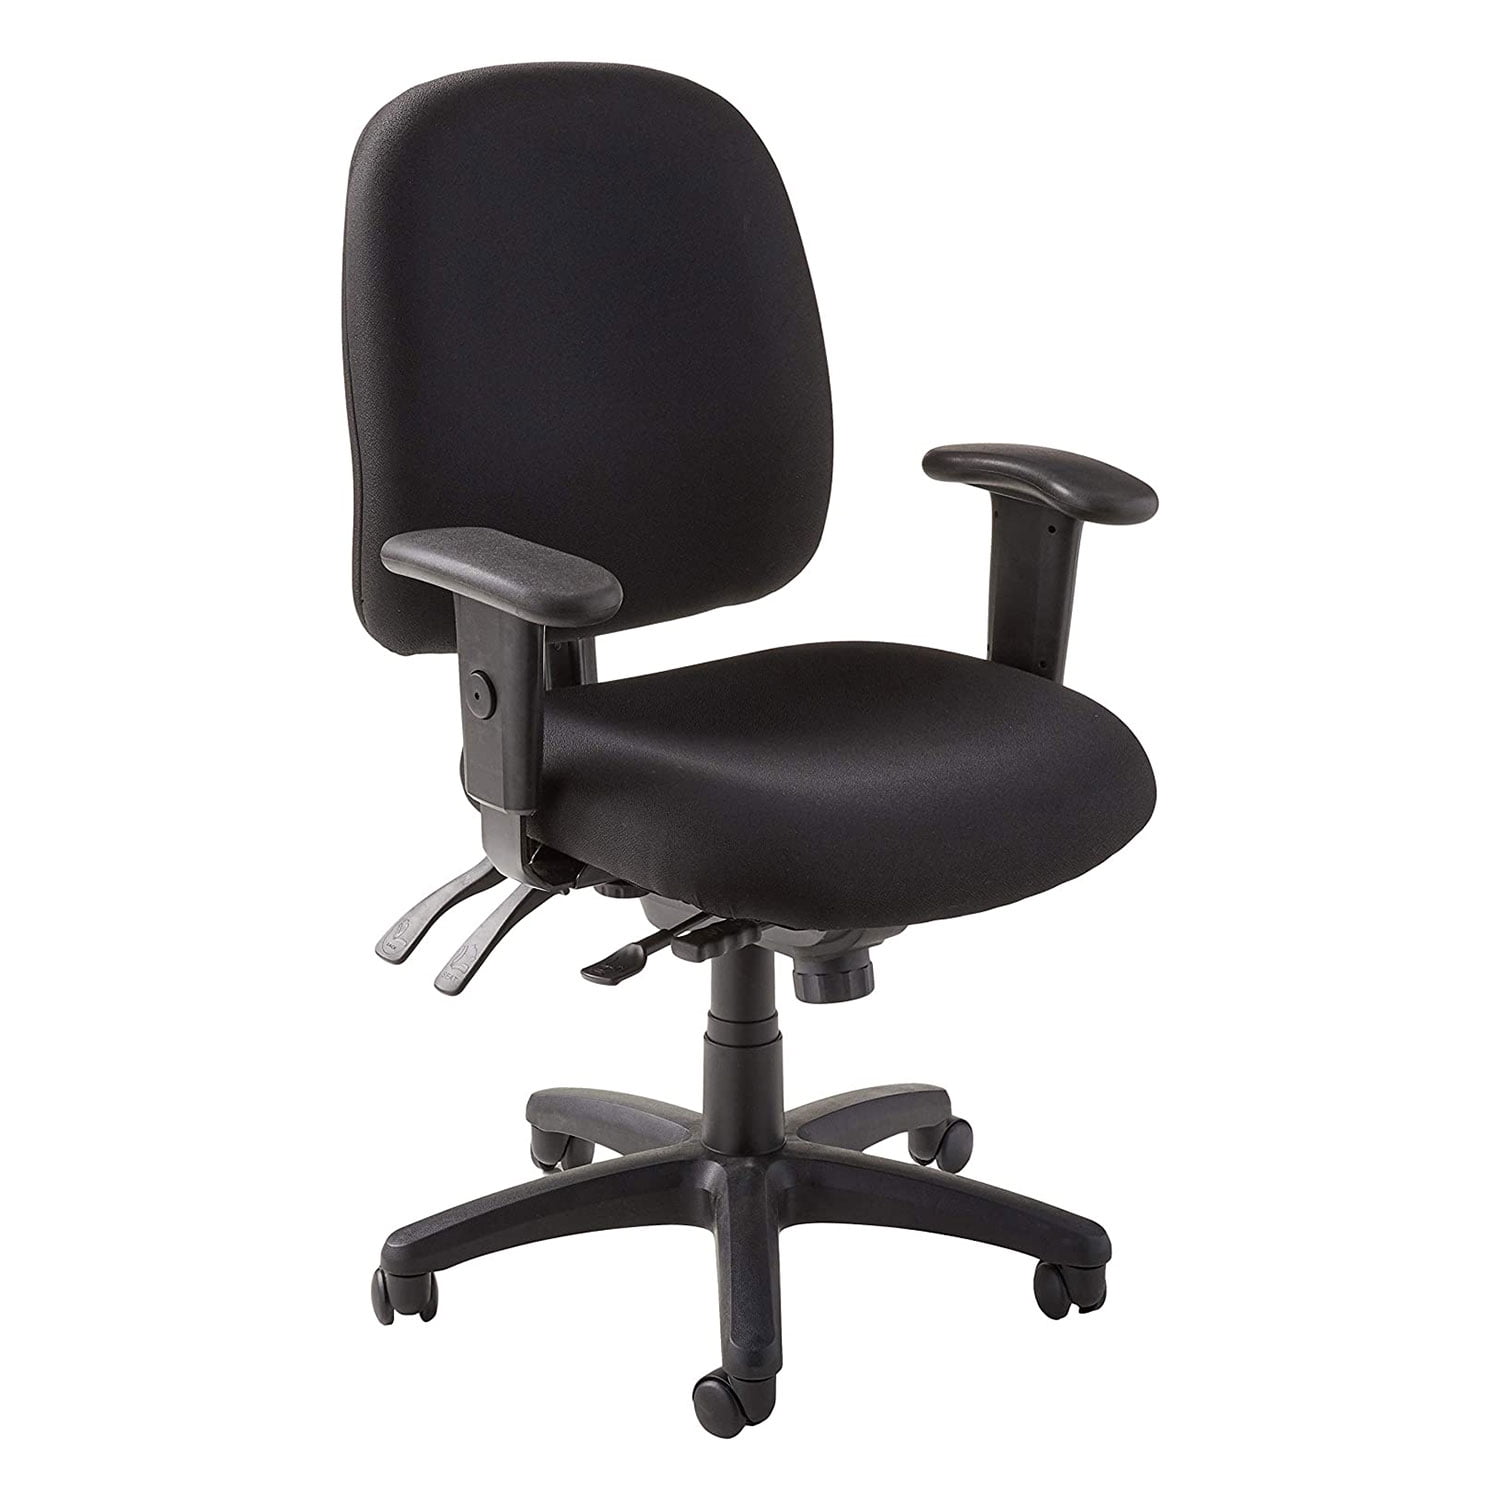 Eurotech Seating MFST5400-BLKM Office Chairs Black